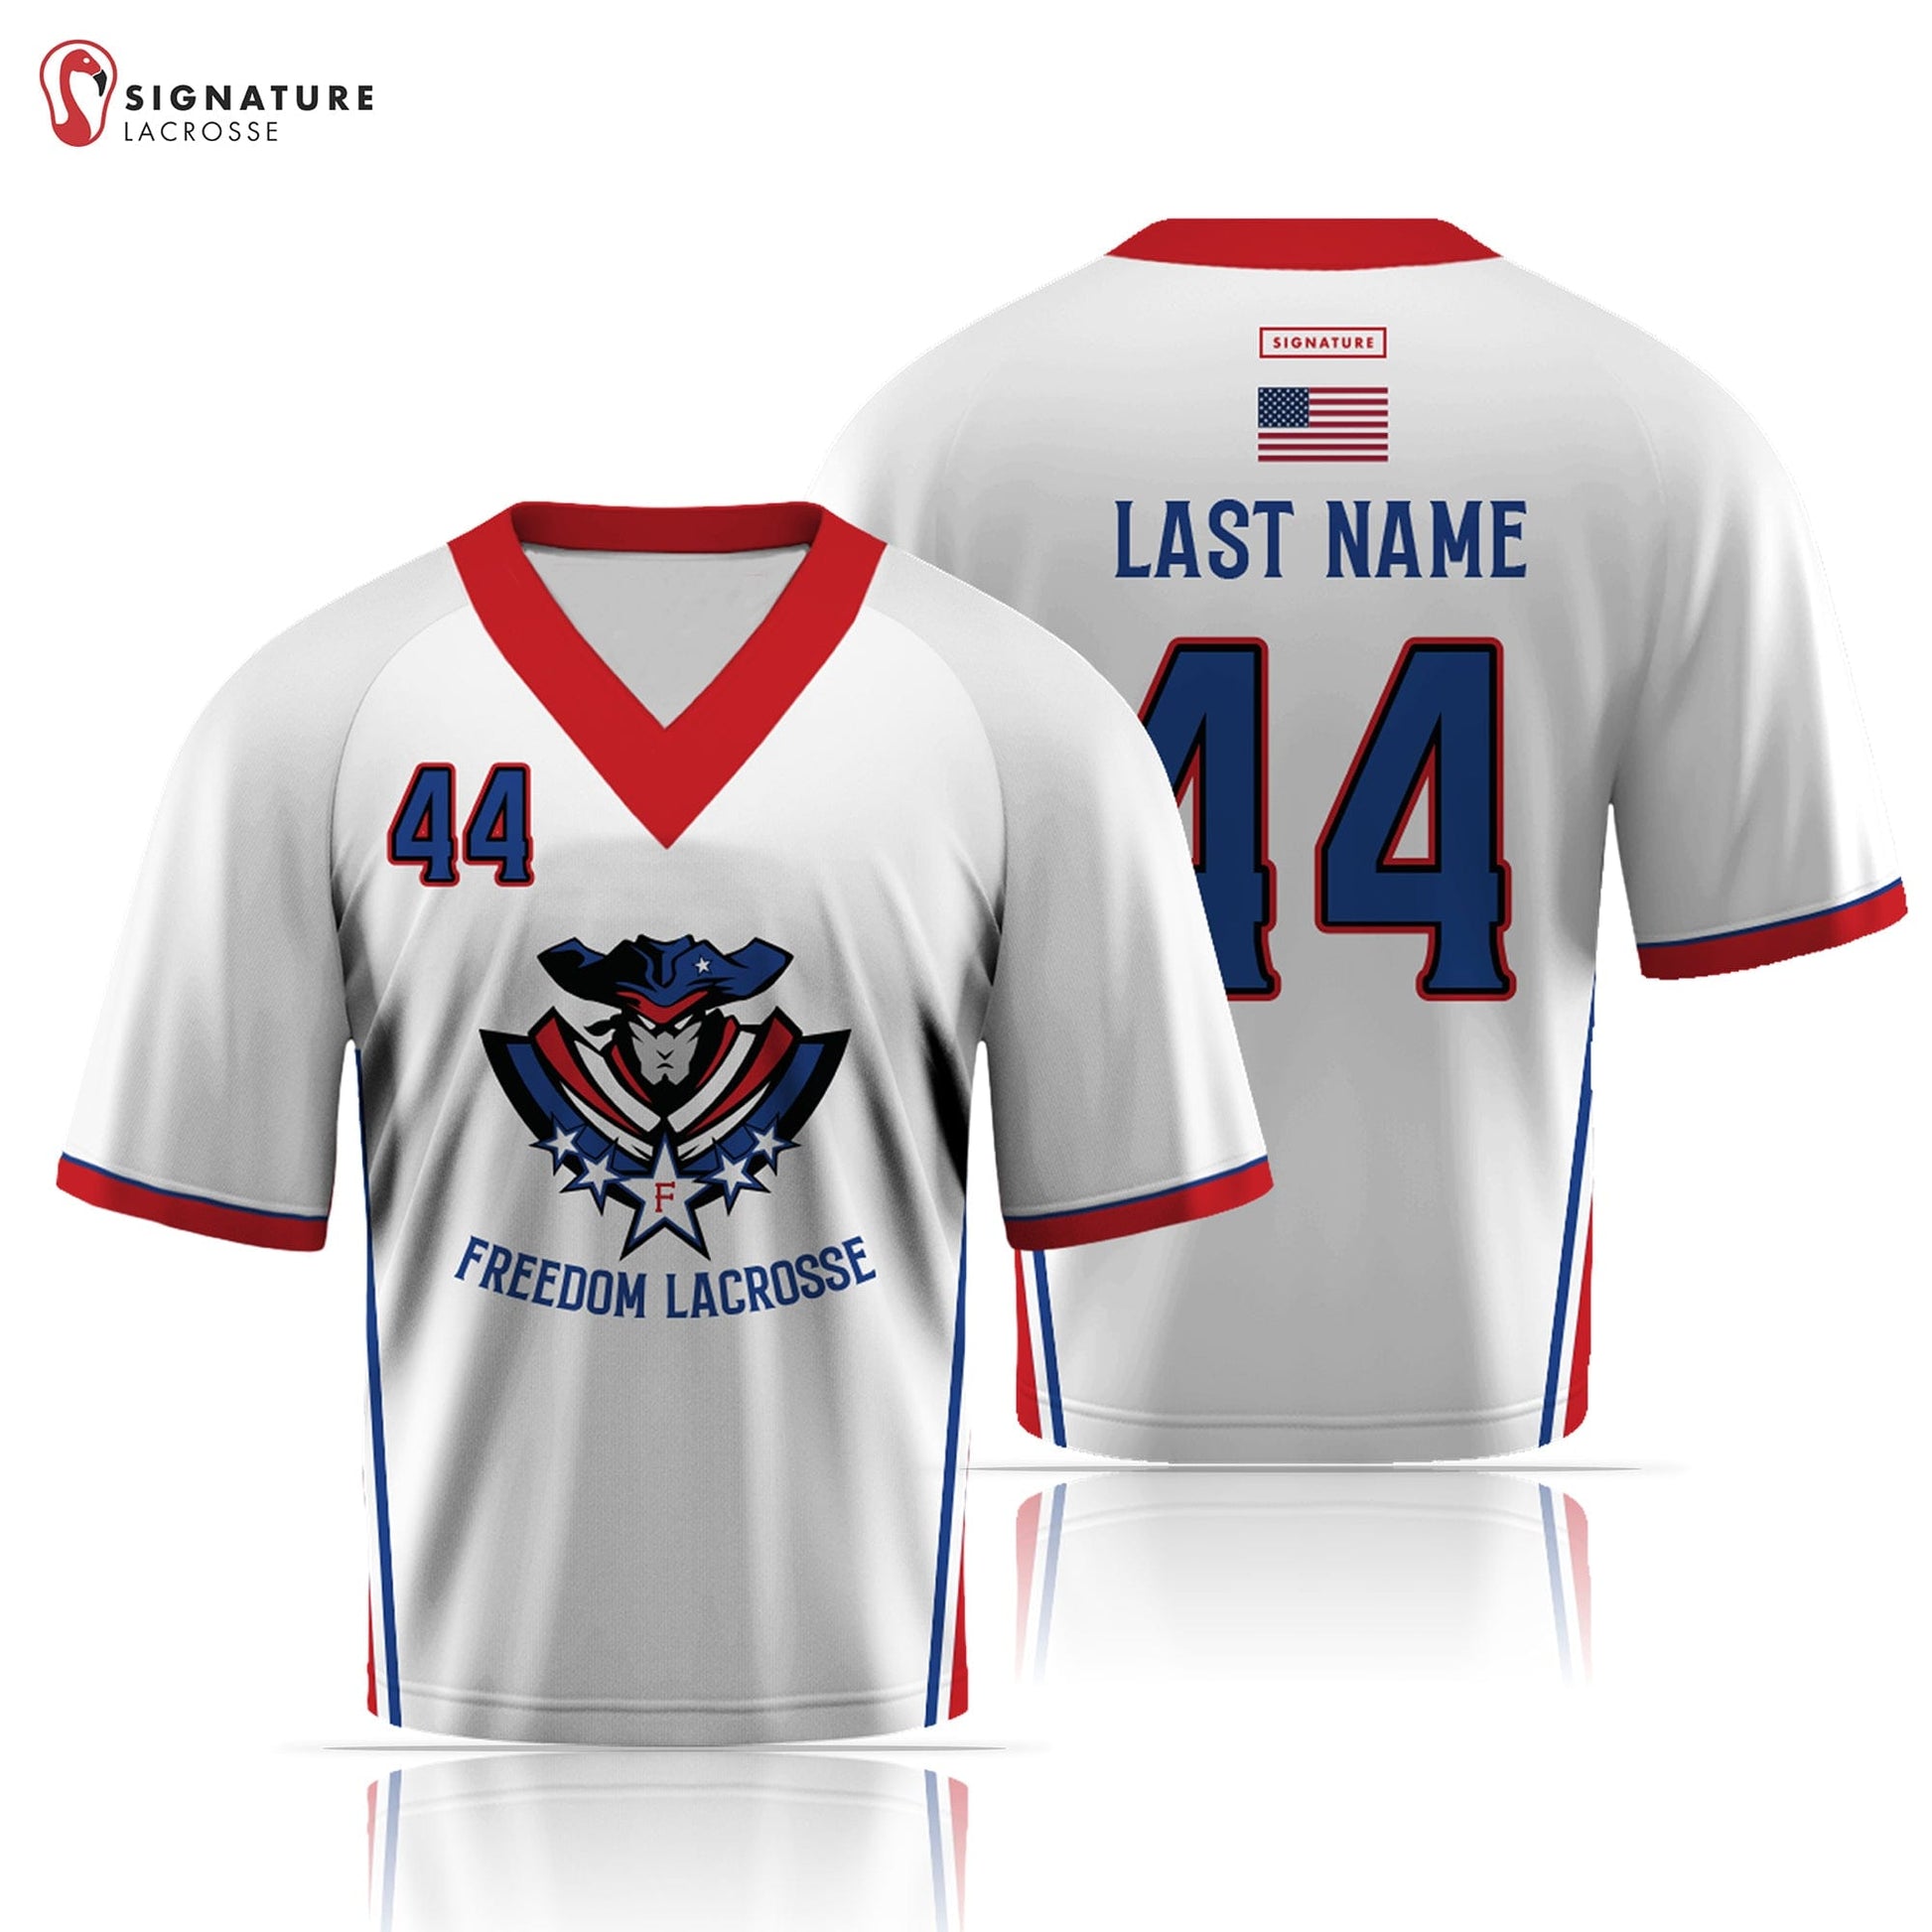 Freedom MS Lacrosse Men's 4 Piece Game Package Signature Lacrosse